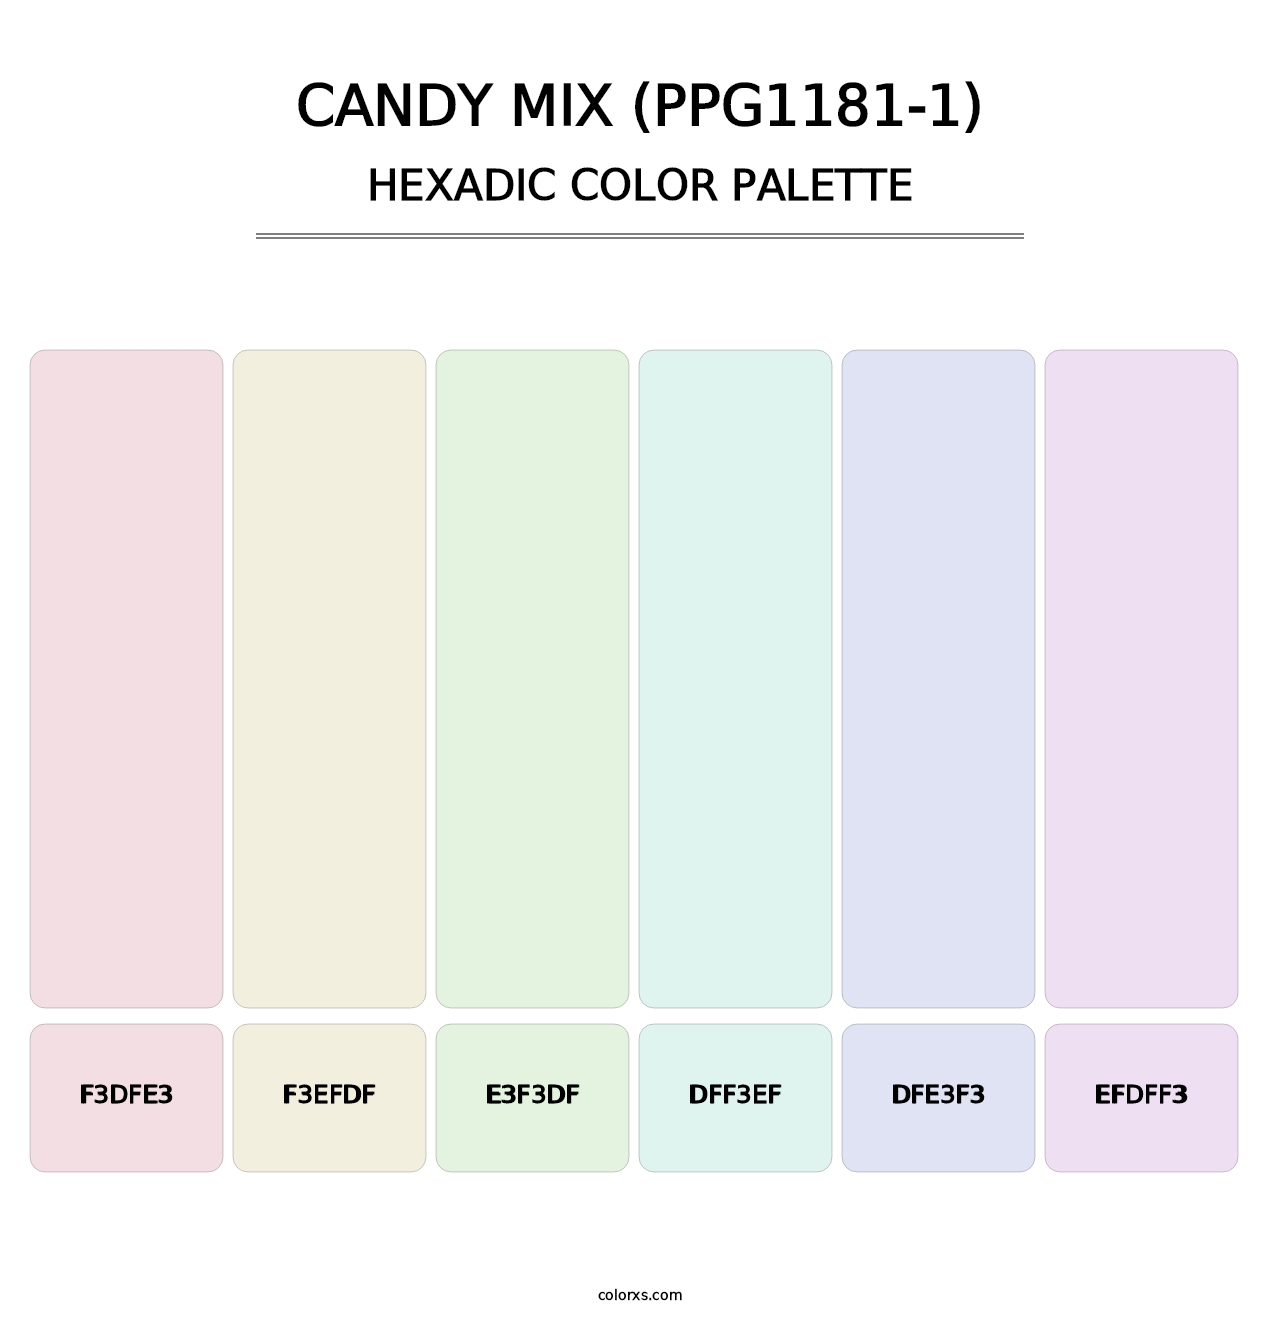 Candy Mix (PPG1181-1) - Hexadic Color Palette